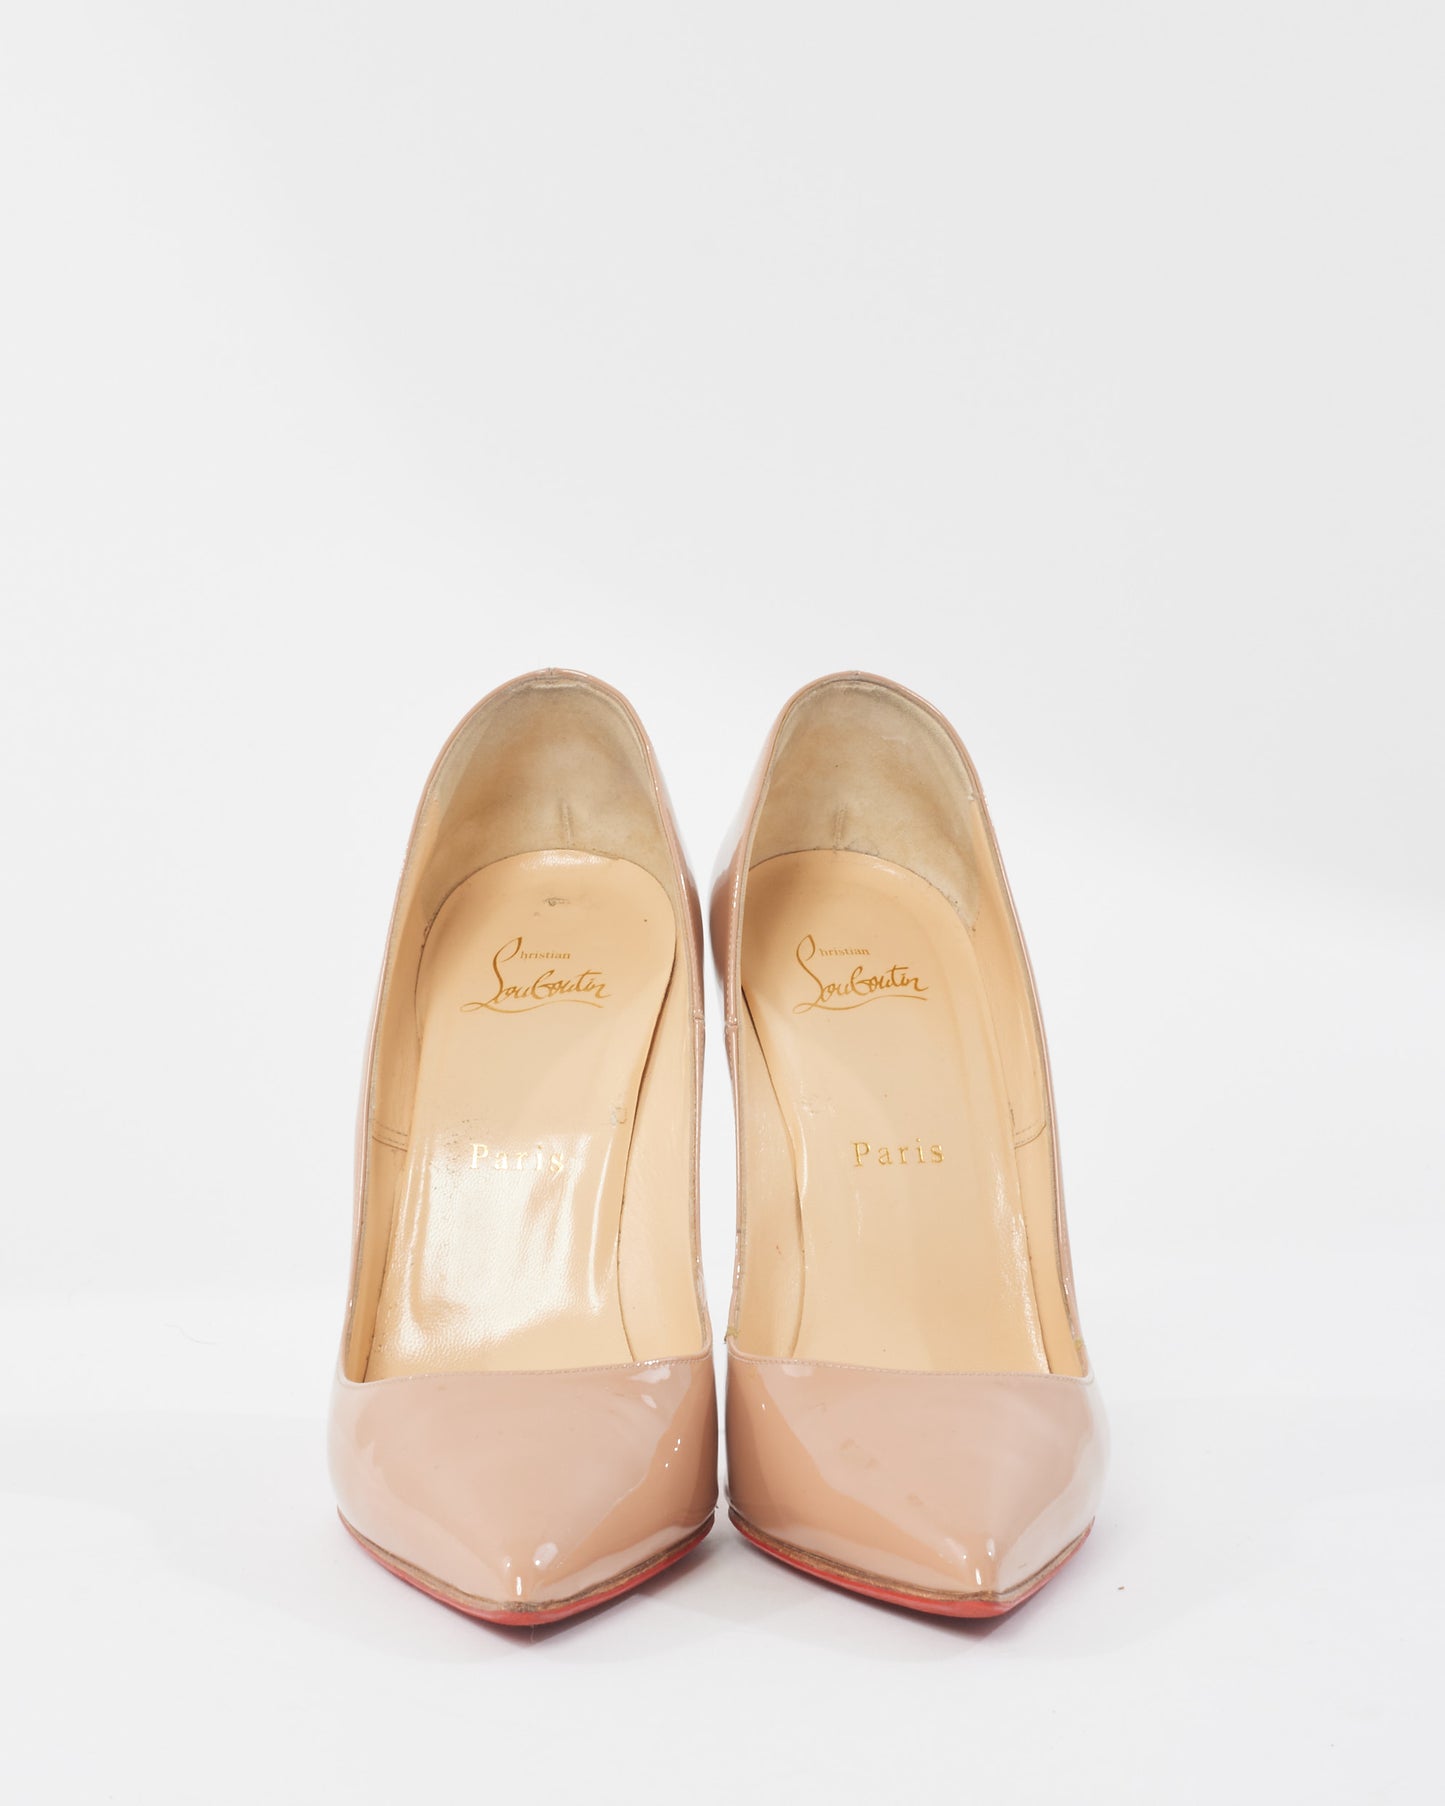 Christian Louboutin Nude Parent Leather So Kate 120MM Pump - 39